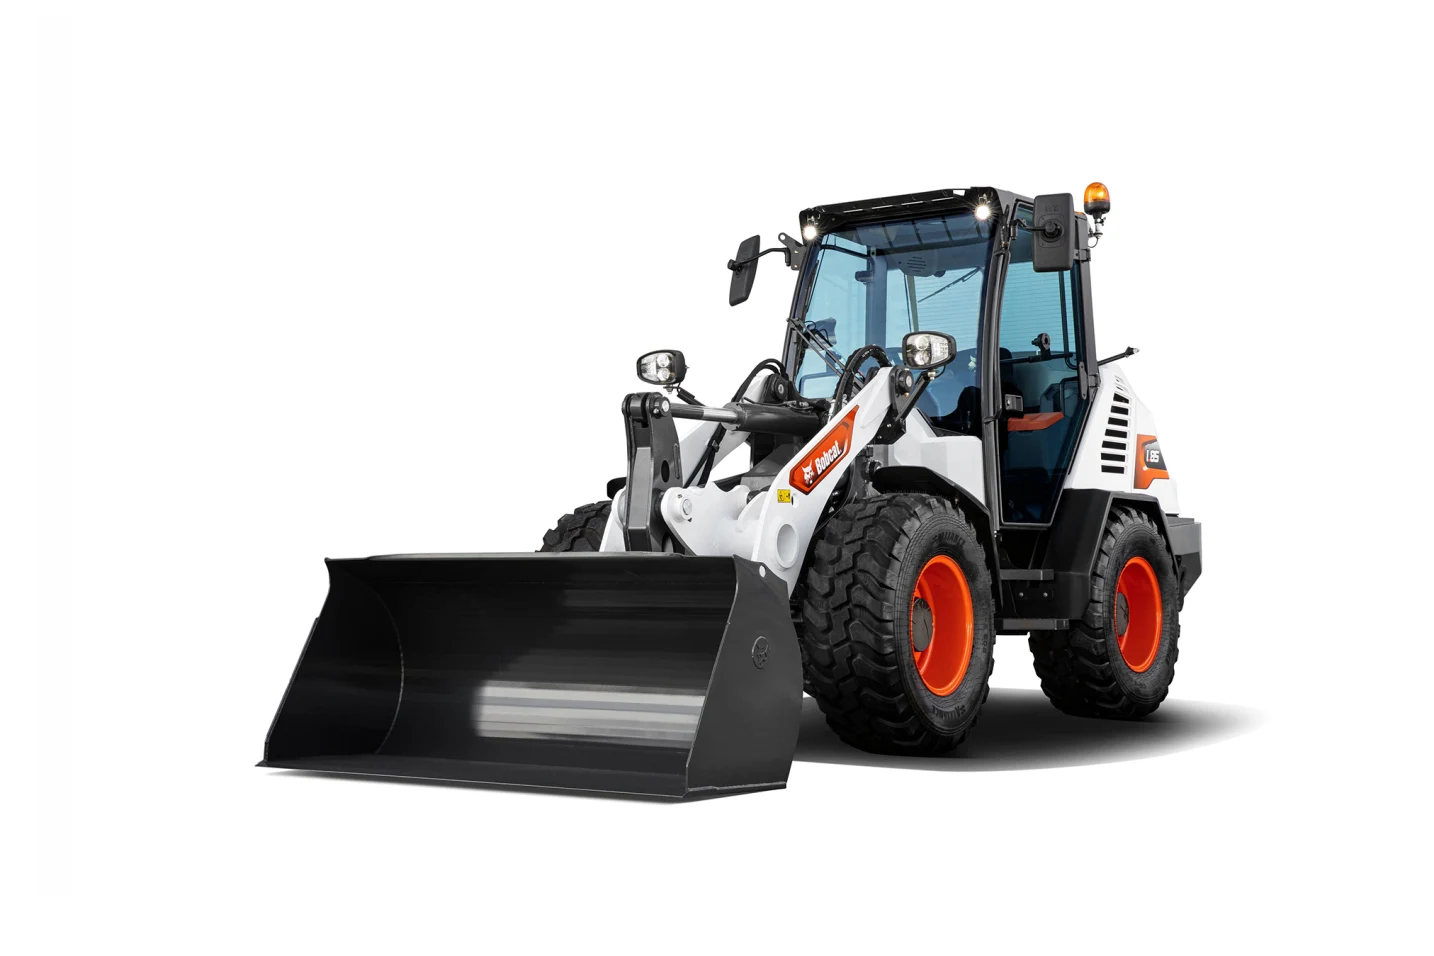 Browse Specs and more for the Bobcat L85 Compact Wheel Loader - Bobcat of Indy